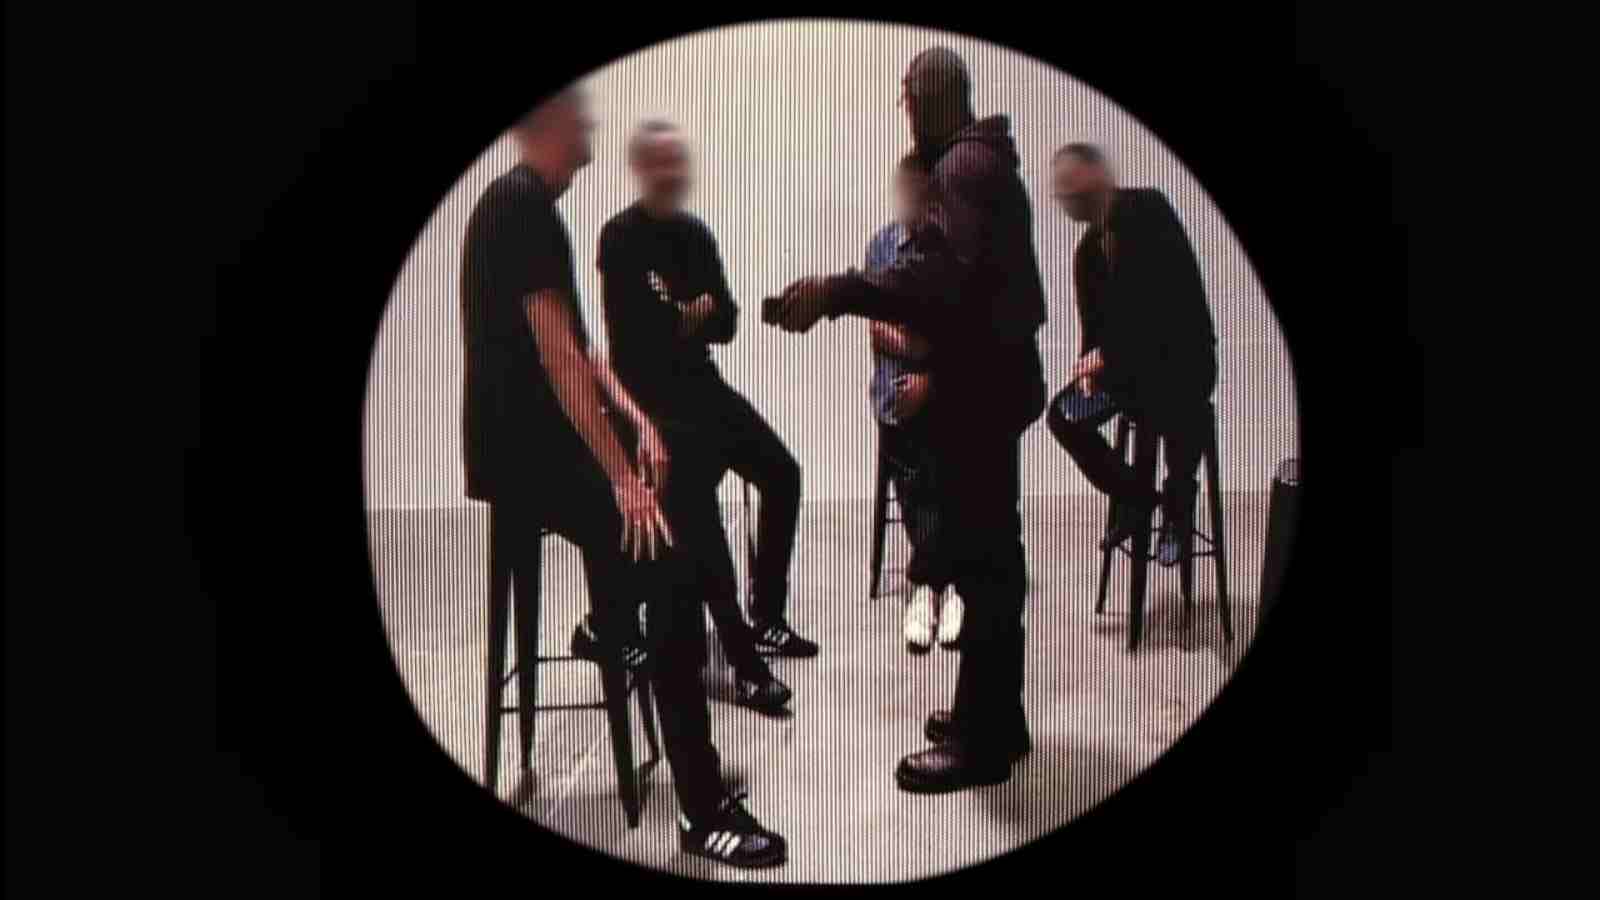 A snippet from Kanye West's video 'Last Week'